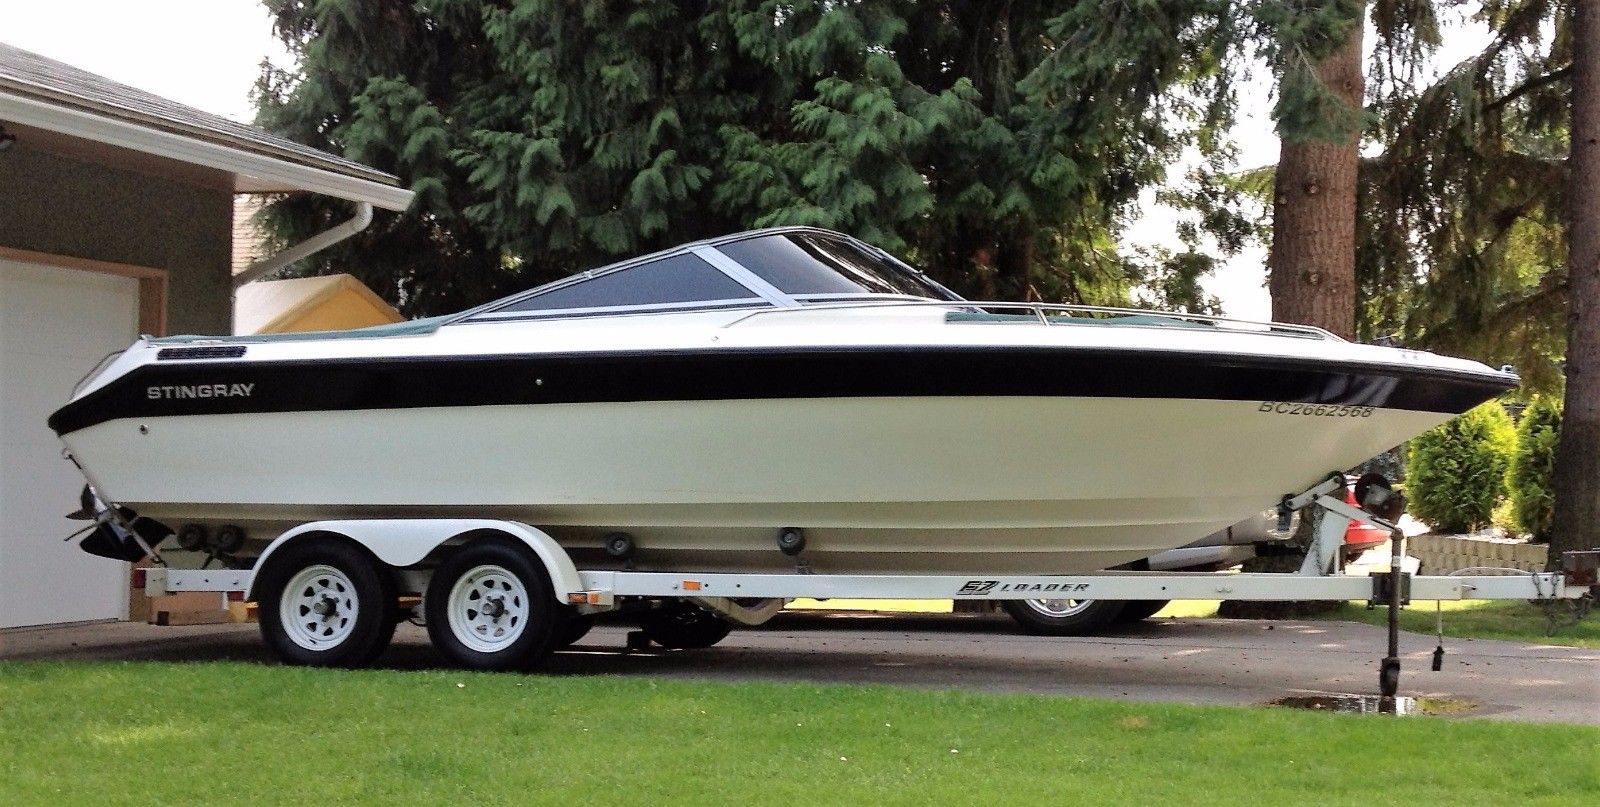 SeaRay 210 Bowrider With Tandem EZ Loader Trailer